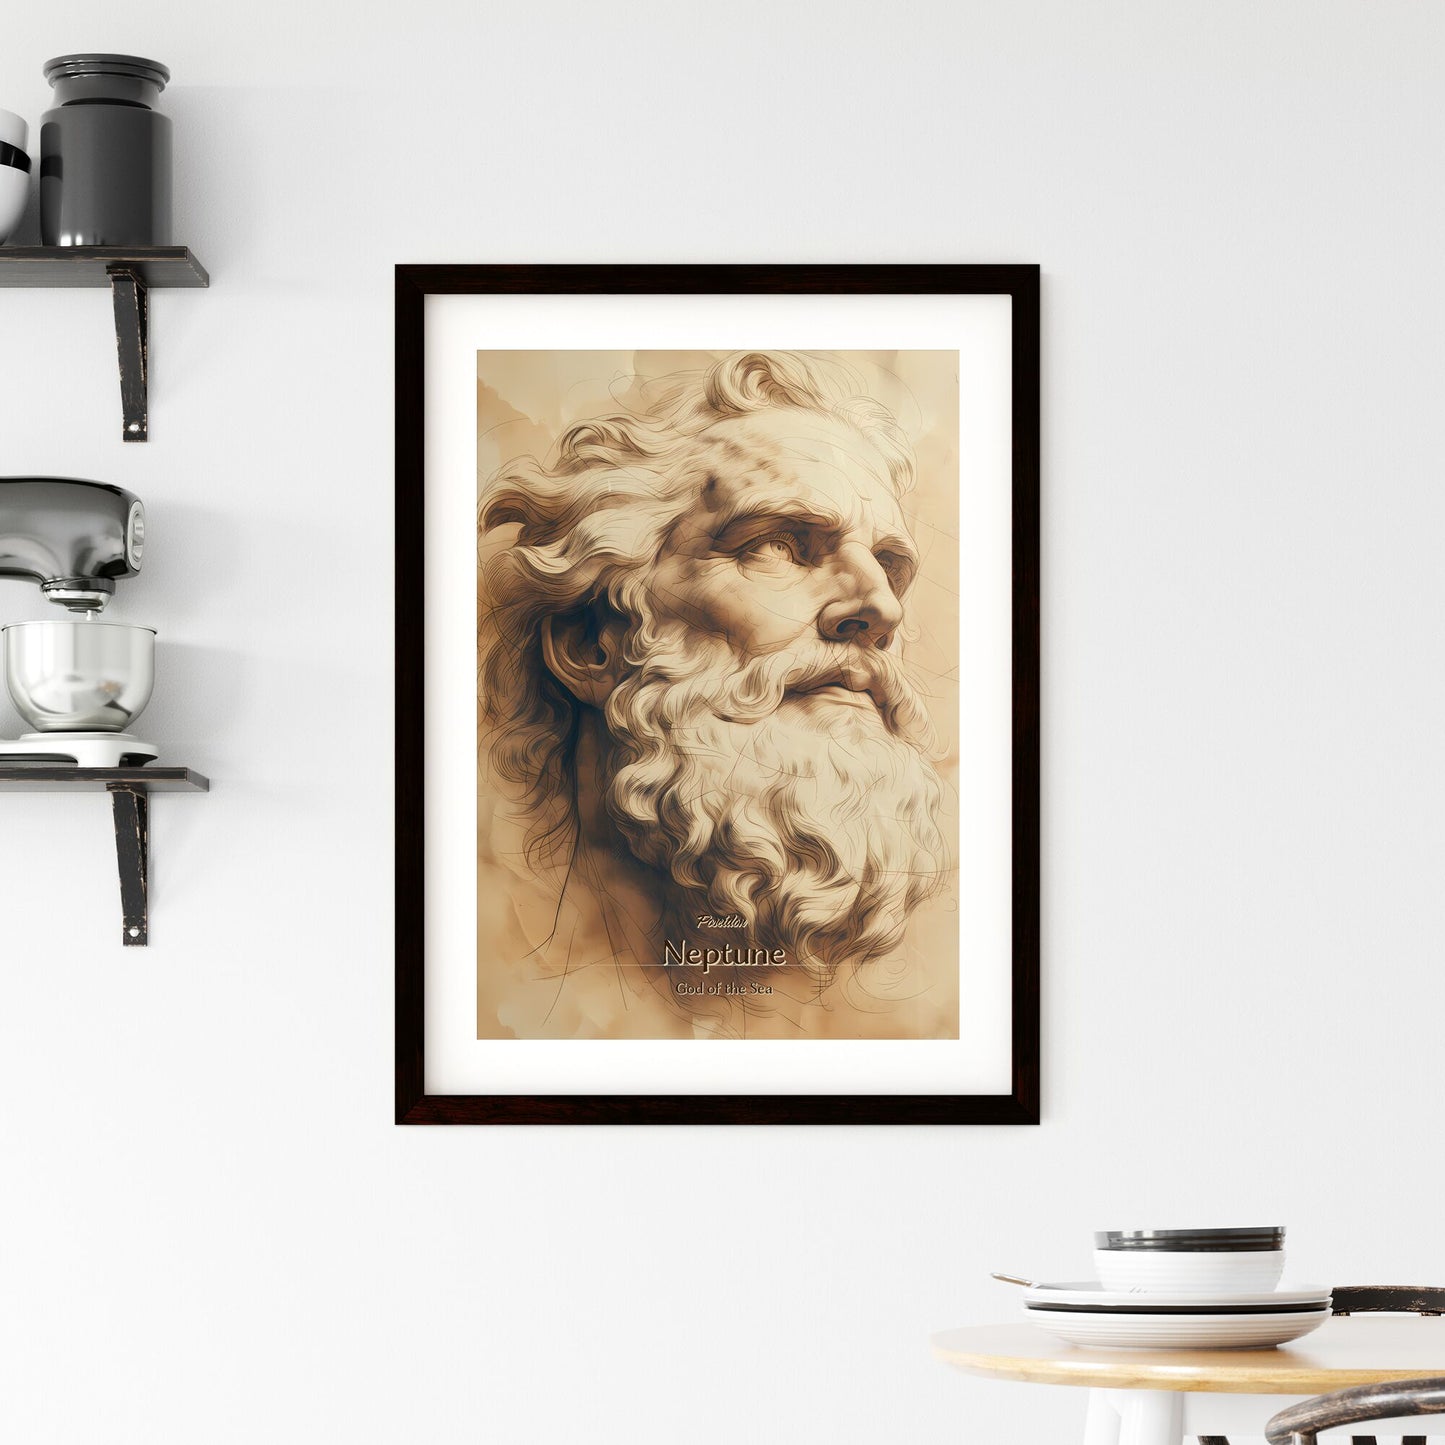 Poseidon, Neptune, God of the Sea, A Poster of a drawing of a bearded man Default Title